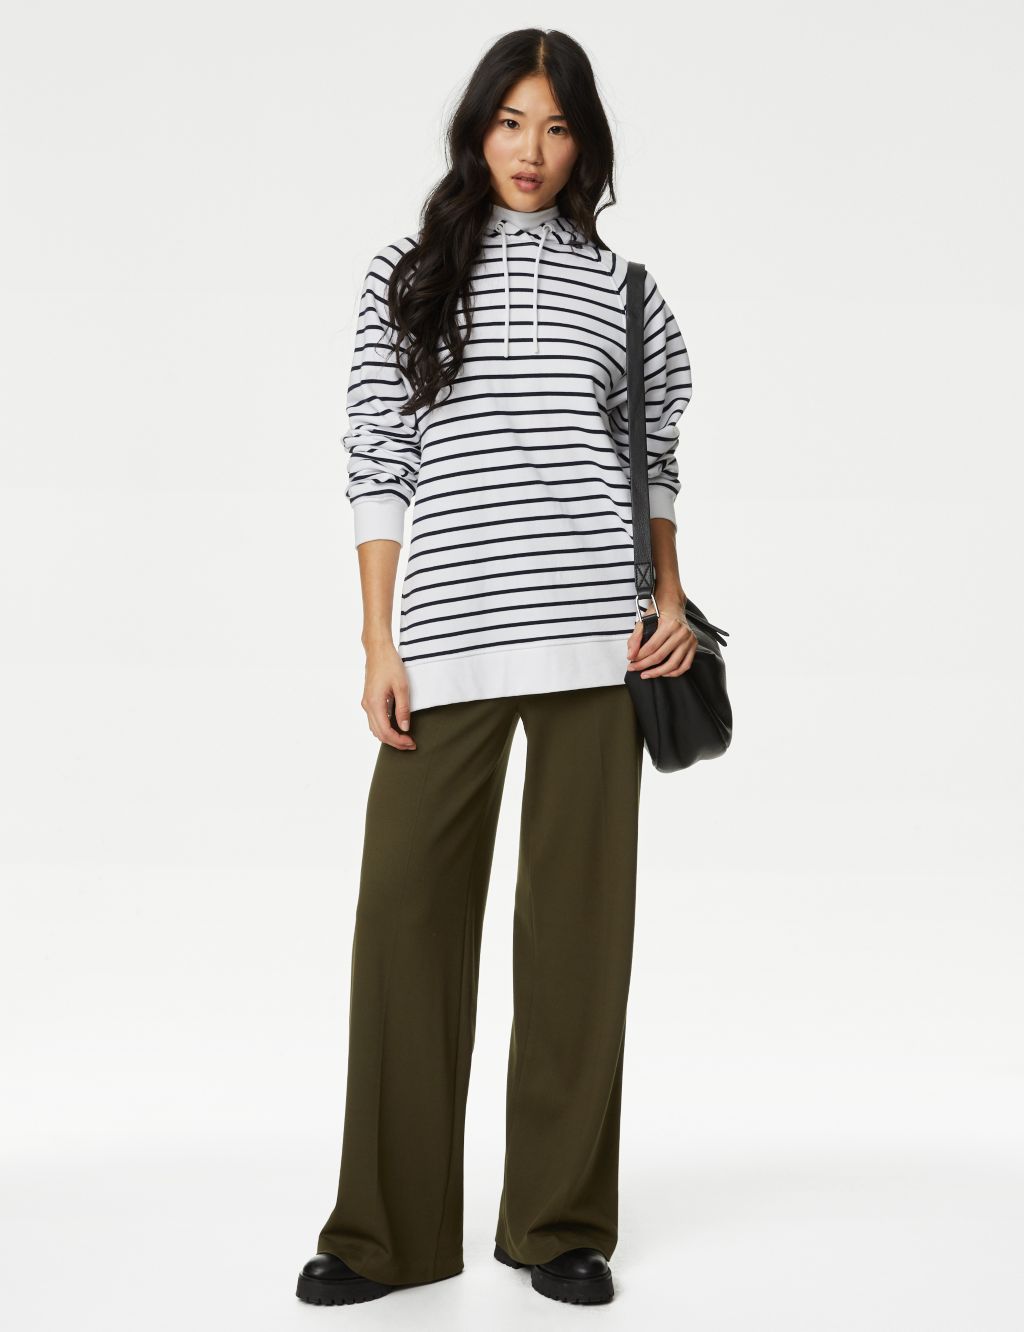 Jersey Wide Leg Trousers with Stretch image 1